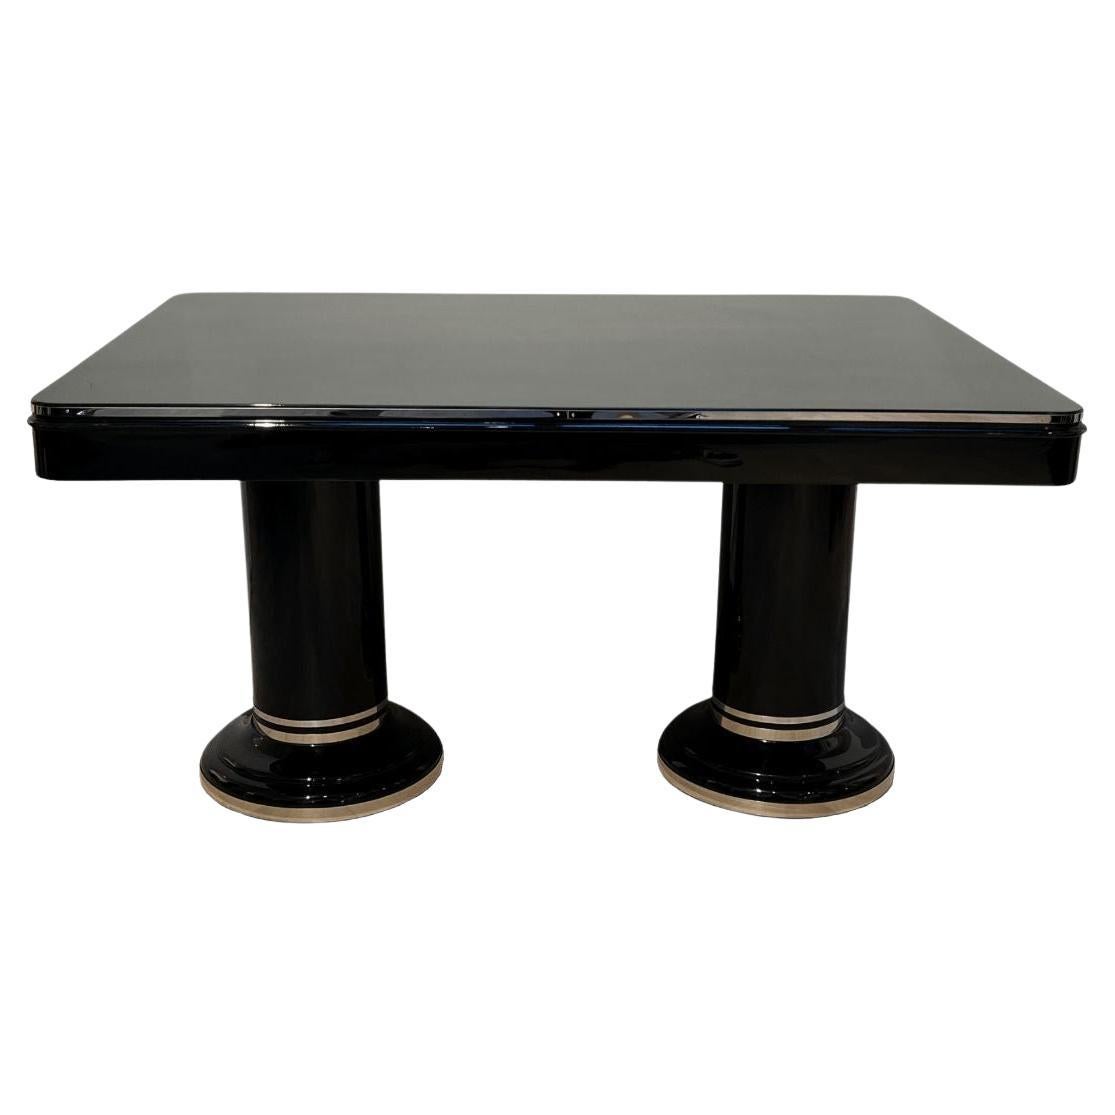 Elevate your dining room with this exquisite French Art Deco extending table, meticulously restored to its full glory. The table features a sleek black piano lacquer finish that exudes elegance, revealing the beautiful mahogany veneer underneath.